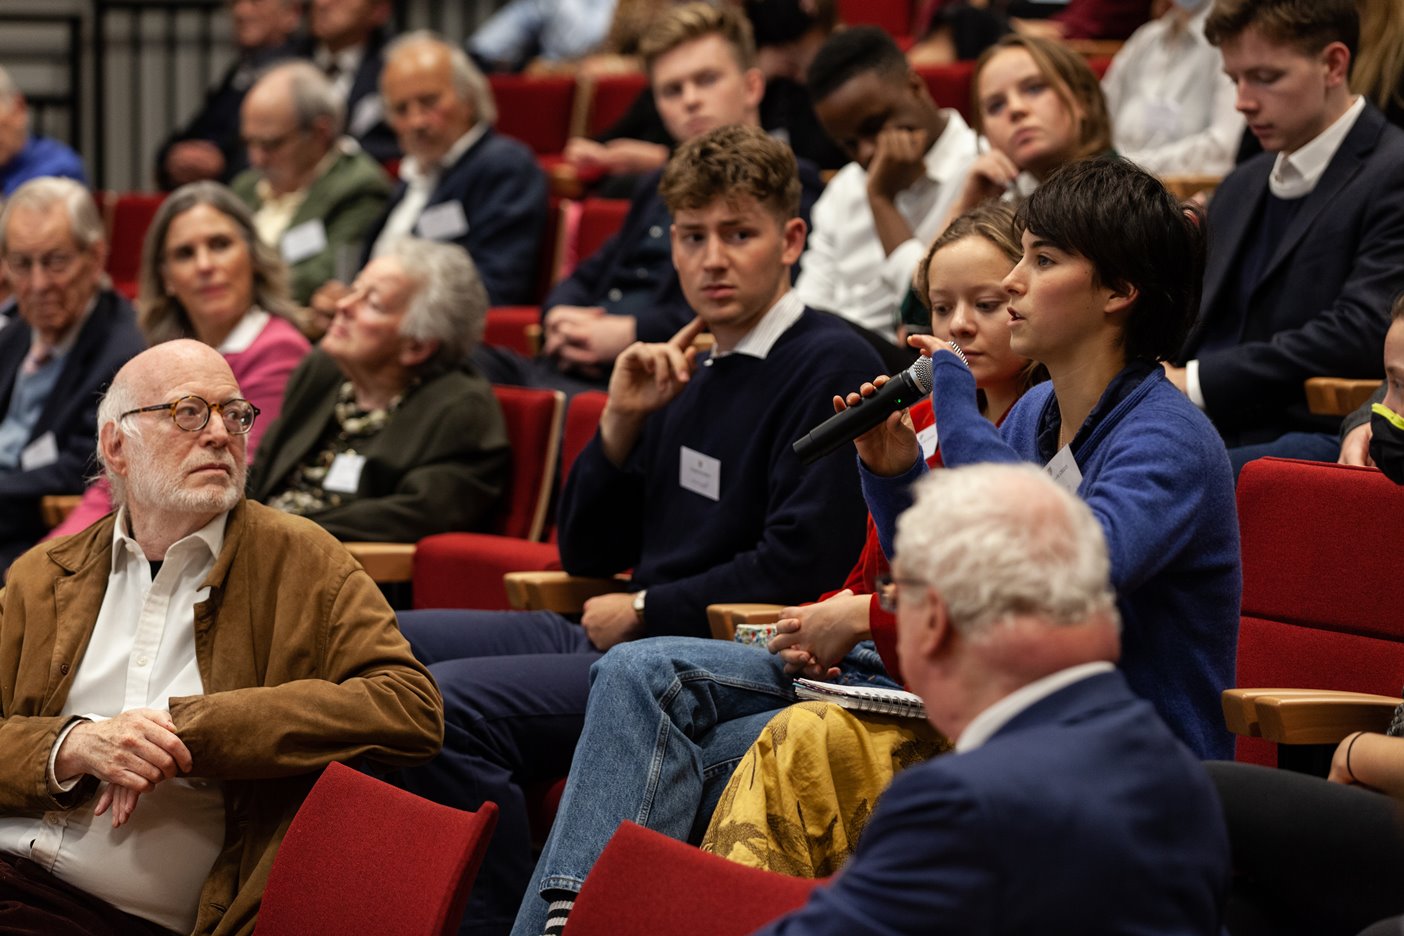 An audience member asking a question, while other audience members look on